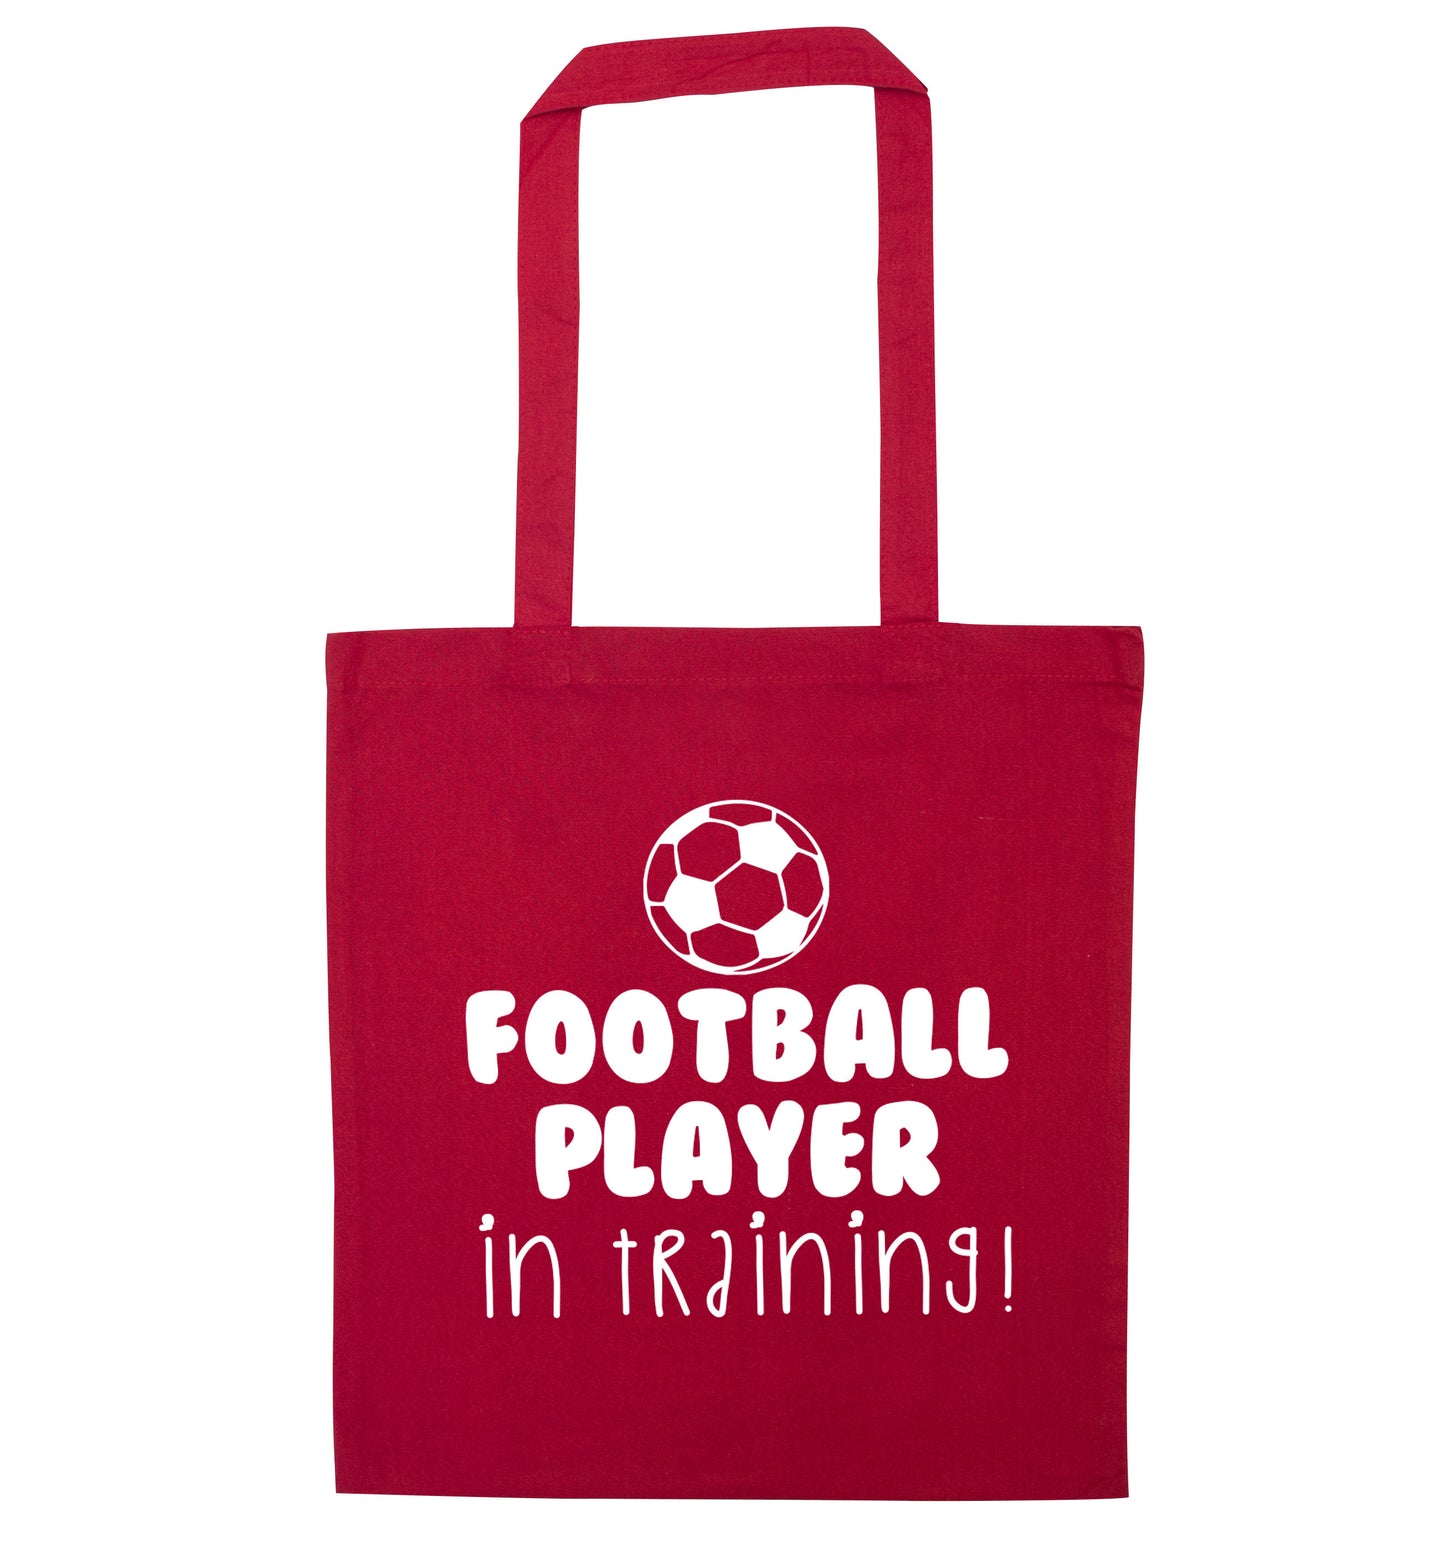 Football player in training red tote bag